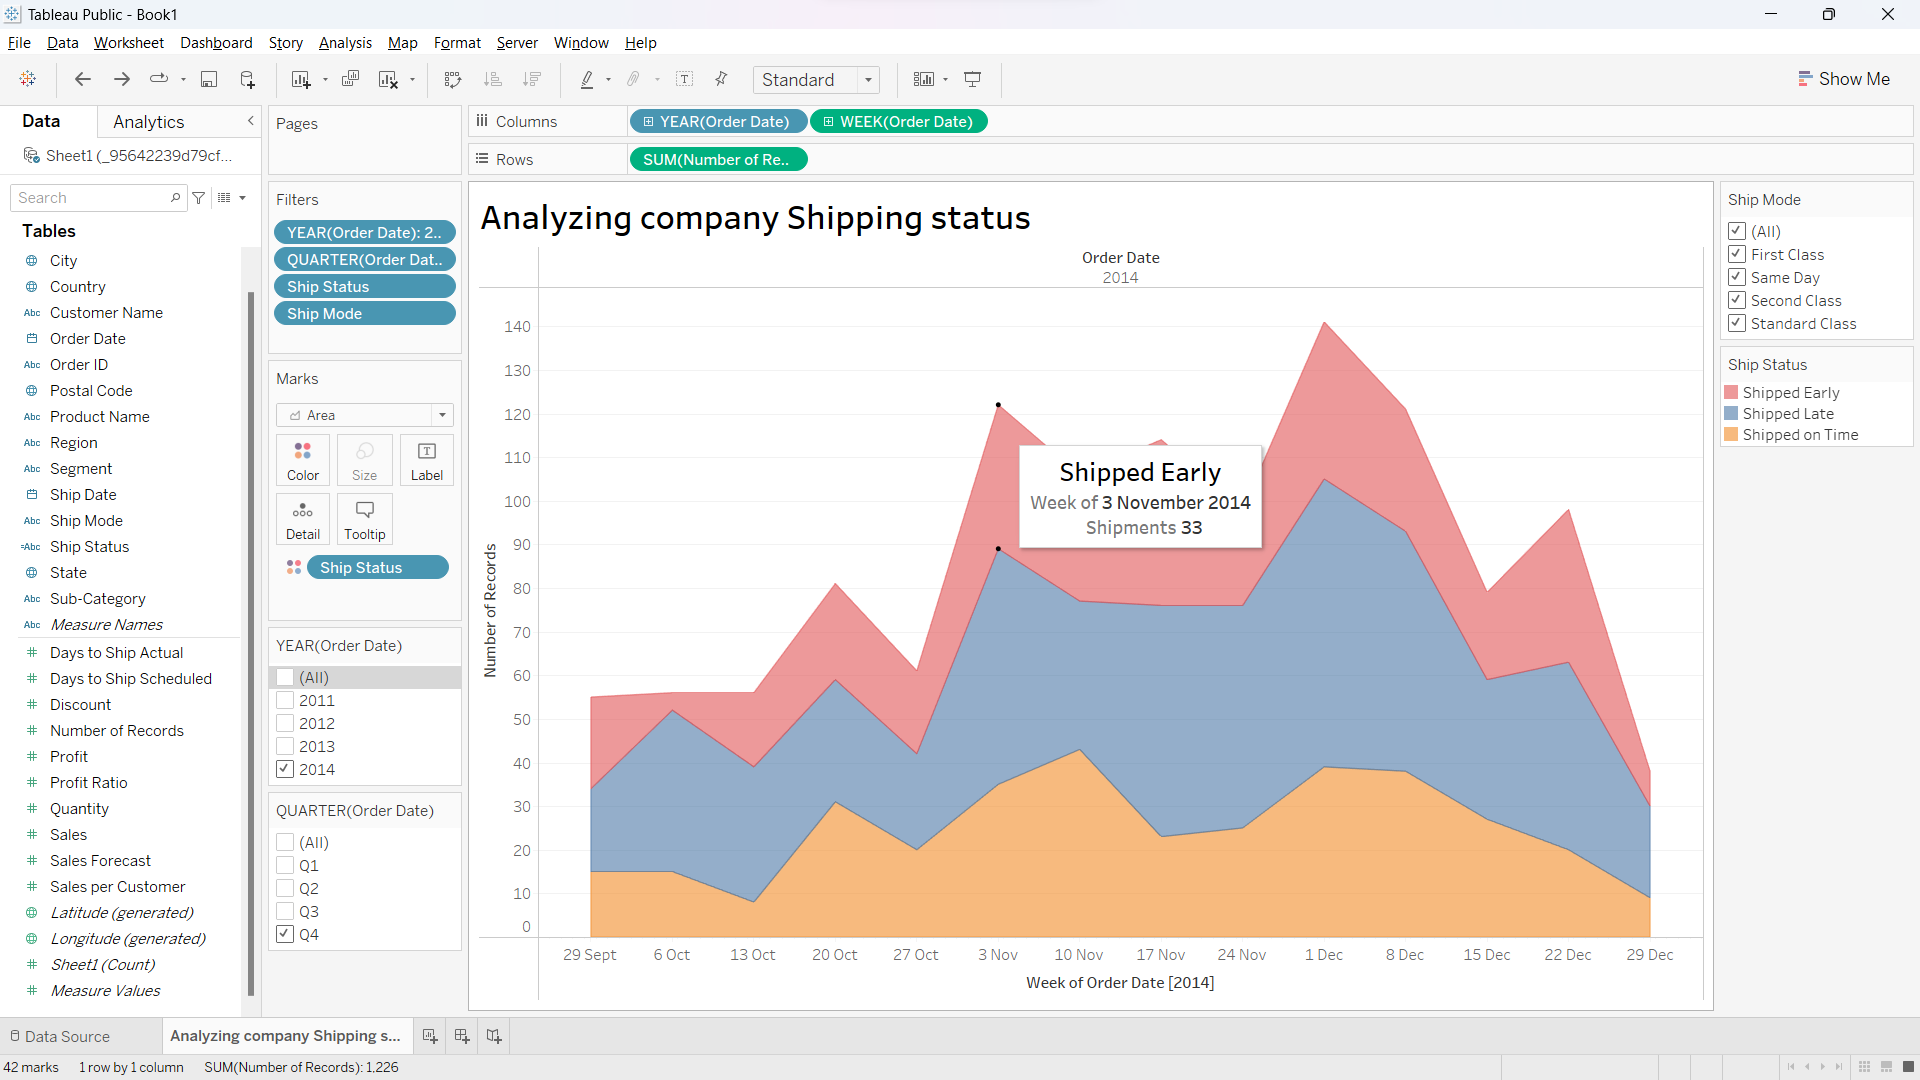 Visual Analytics and Calculations in Tableau, by poojit